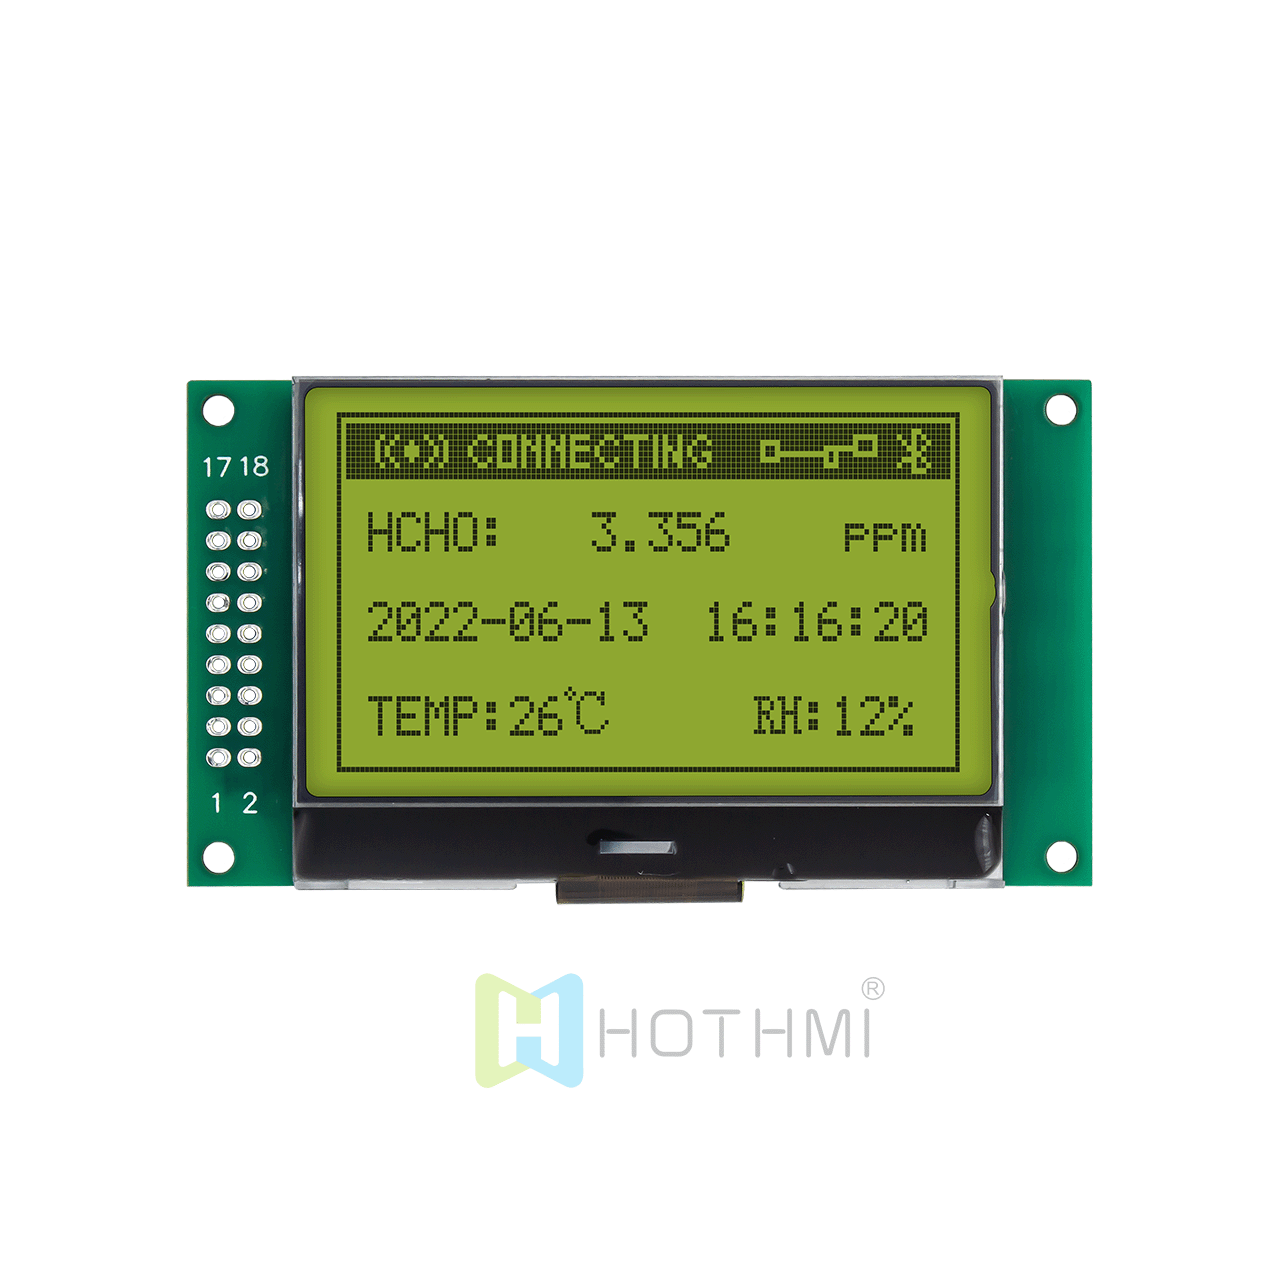 2.4-inch LCD132x64 industrial control graphic LCD screen/LCM13264 graphic dot matrix LCD module/STN positive display yellow-green background